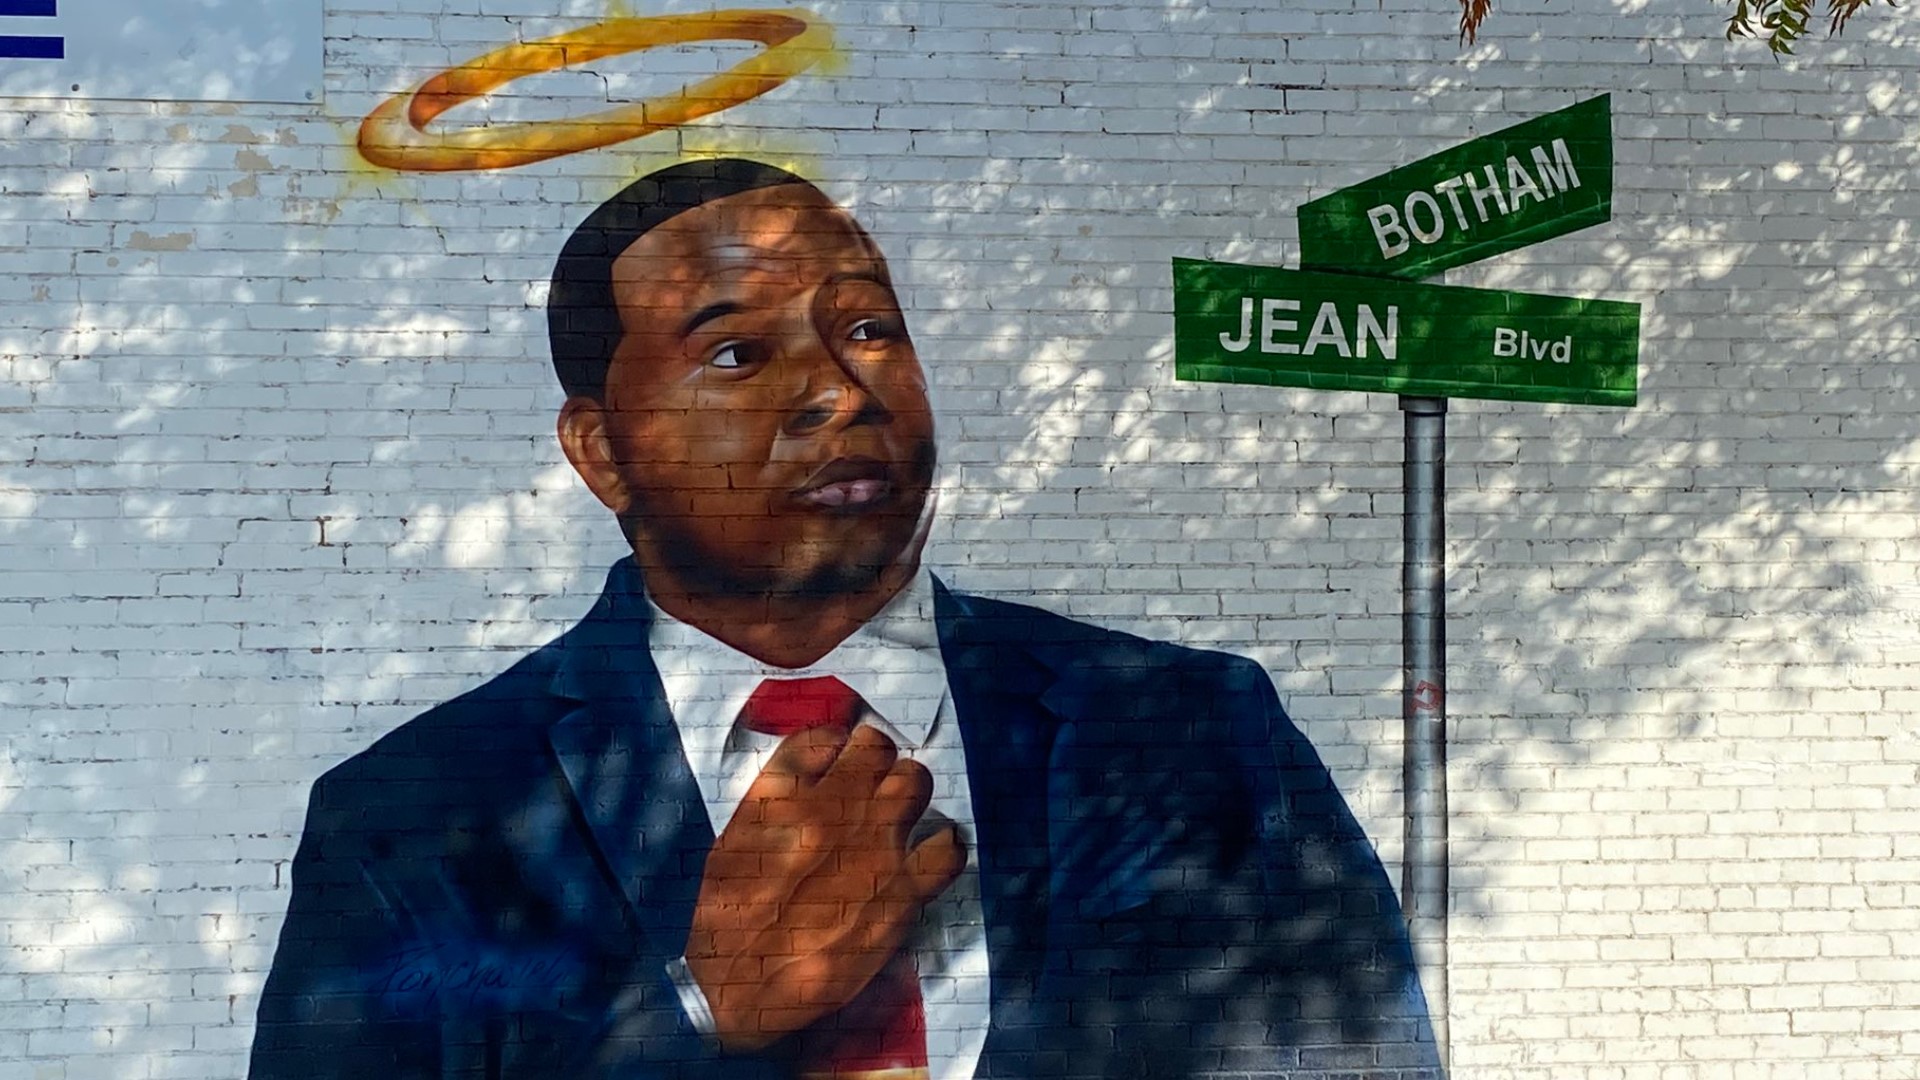 On Sept. 29, Botham Jean would have turned 29 years old. It would have been his golden birthday.